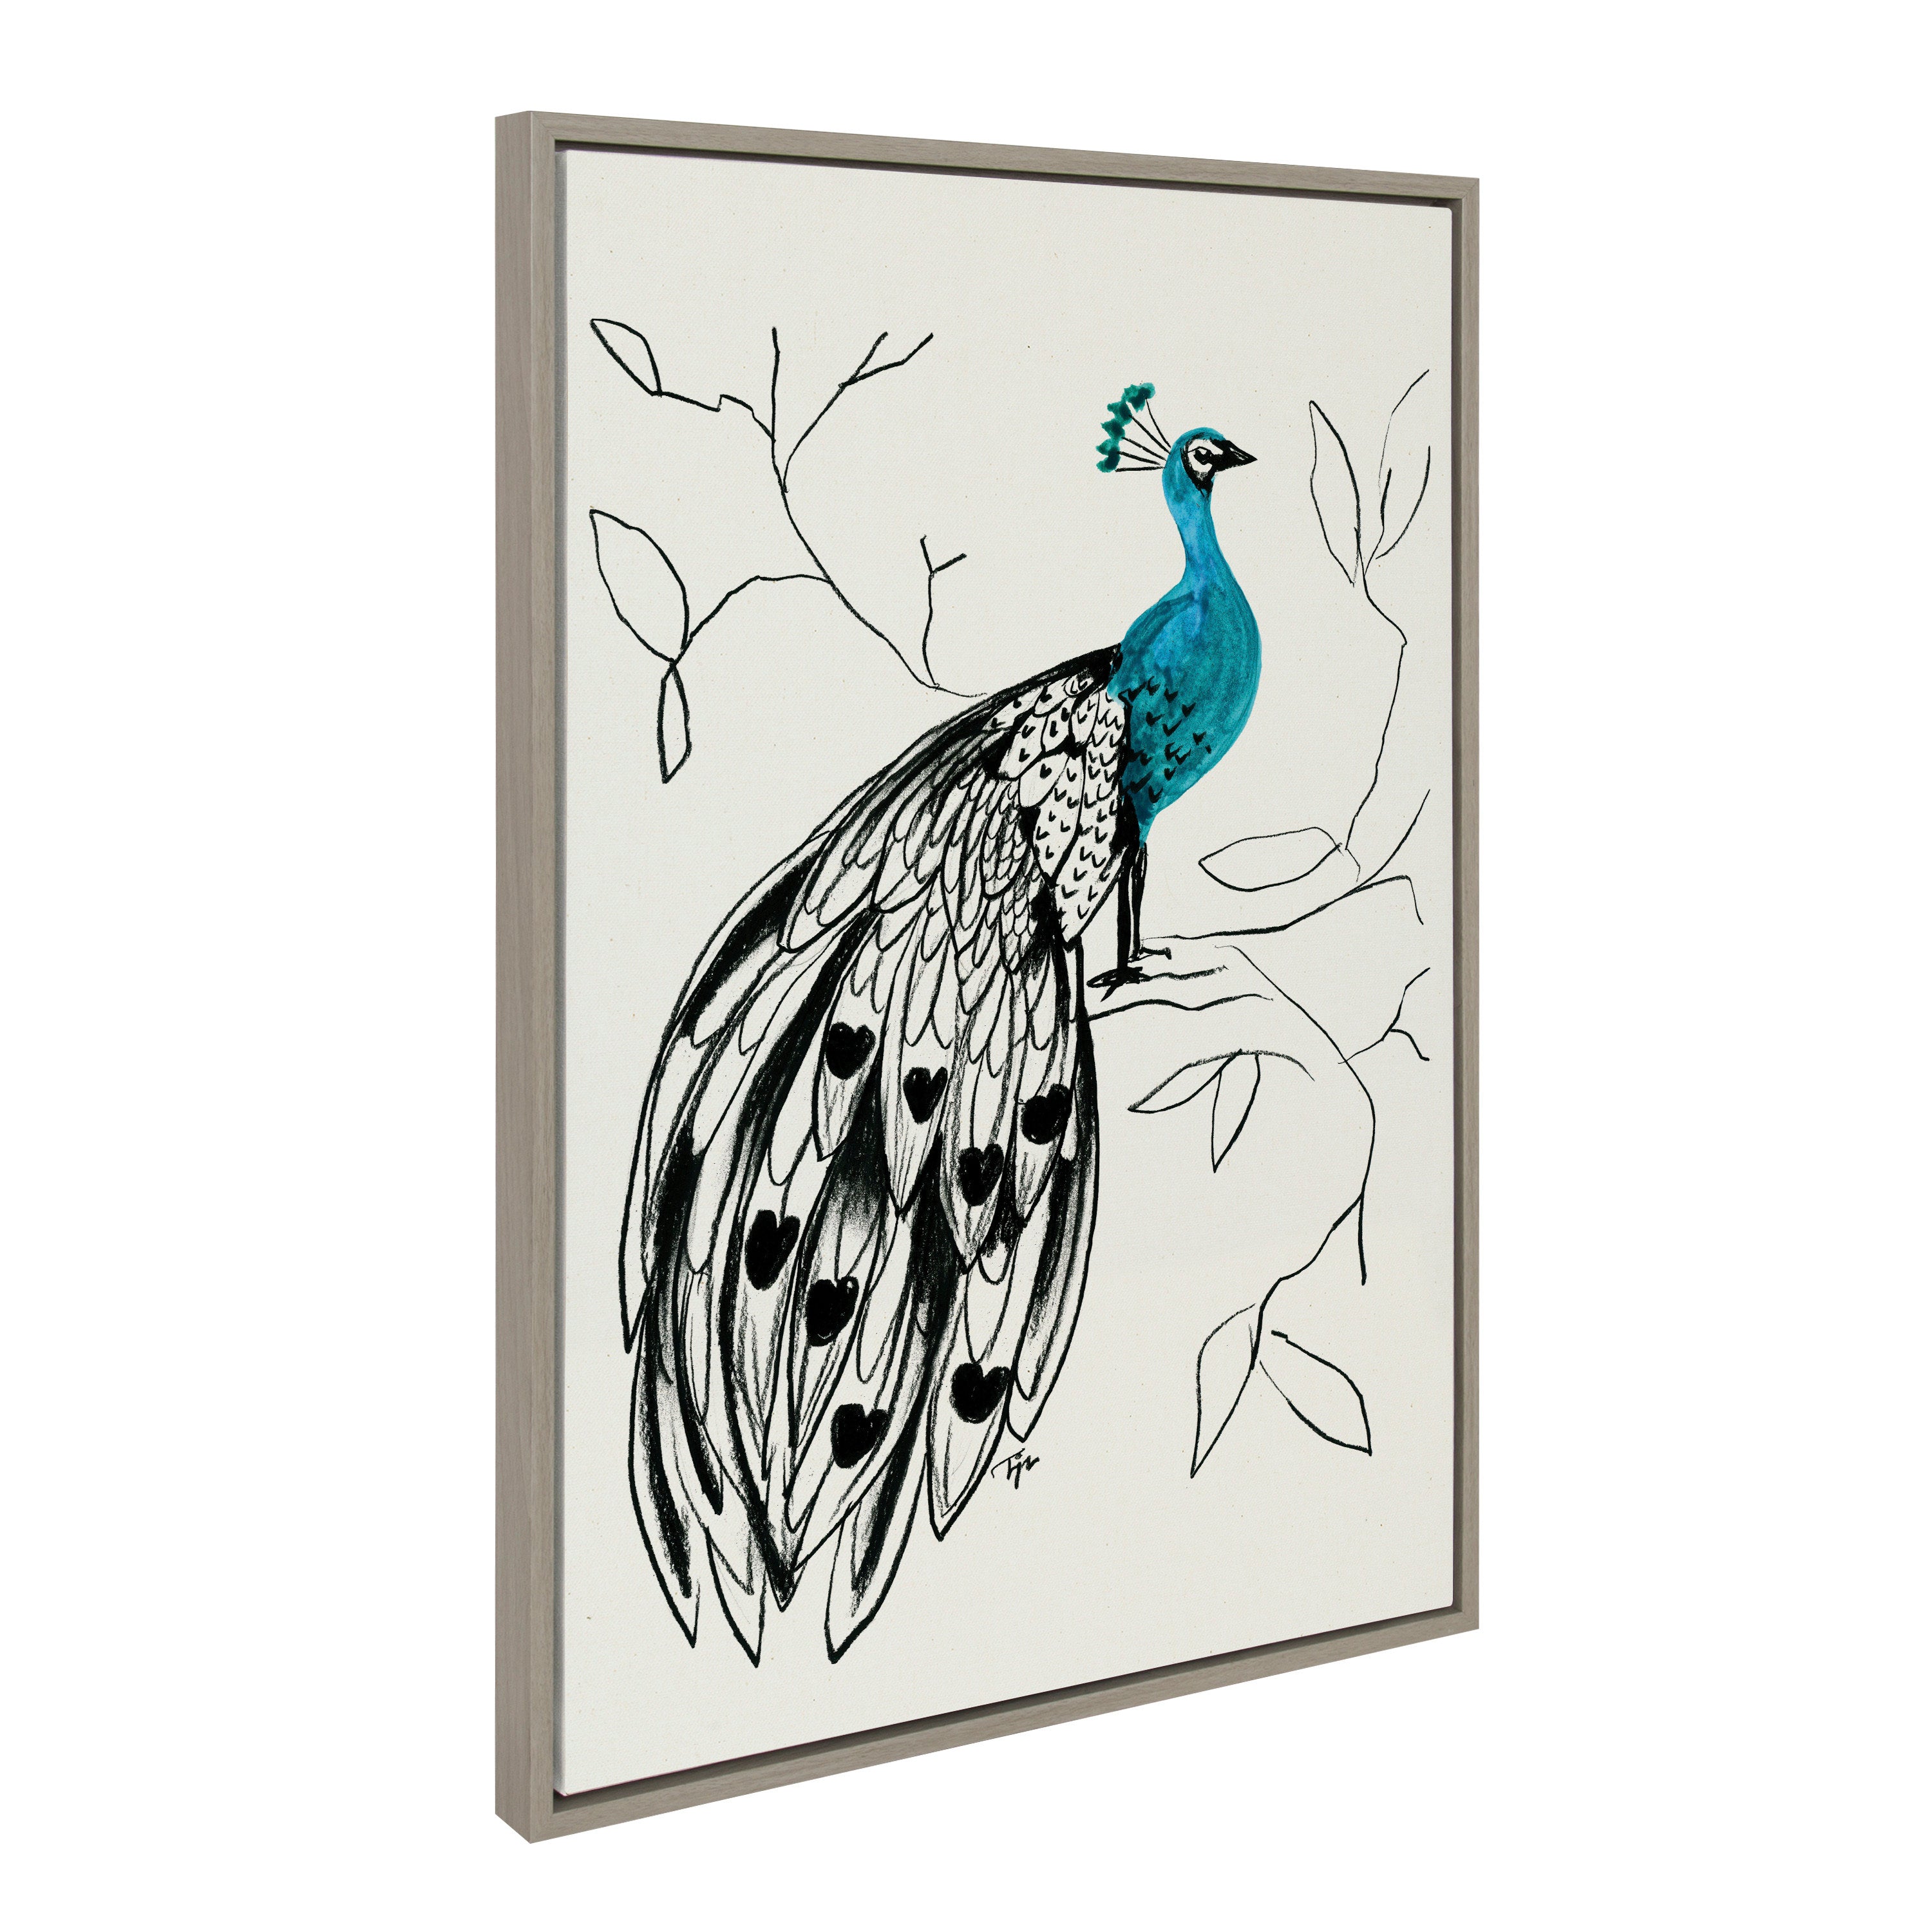 Sylvie 658 Peacock Framed Canvas by Teju Reval of SnazzyHues